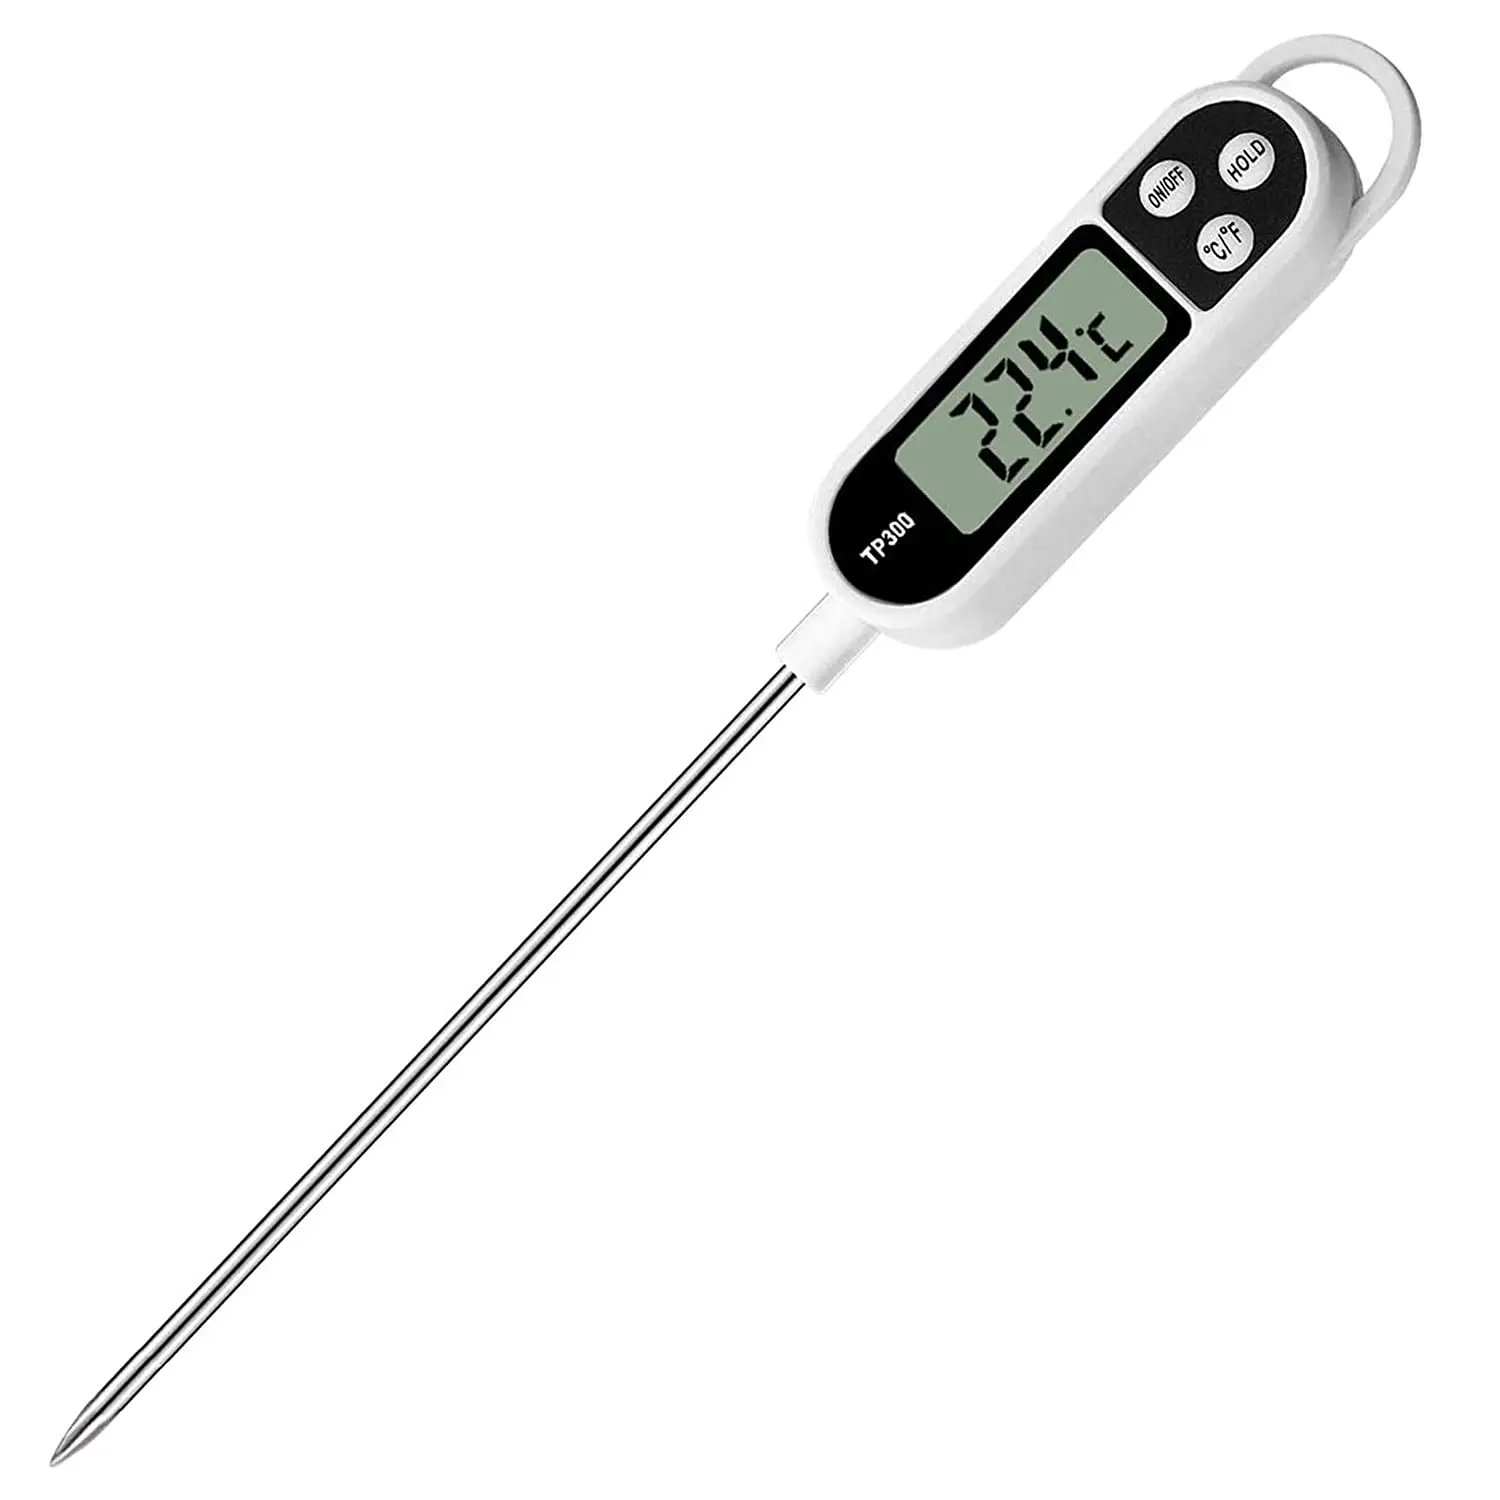 Digital Food Thermometer, Water Thermometer